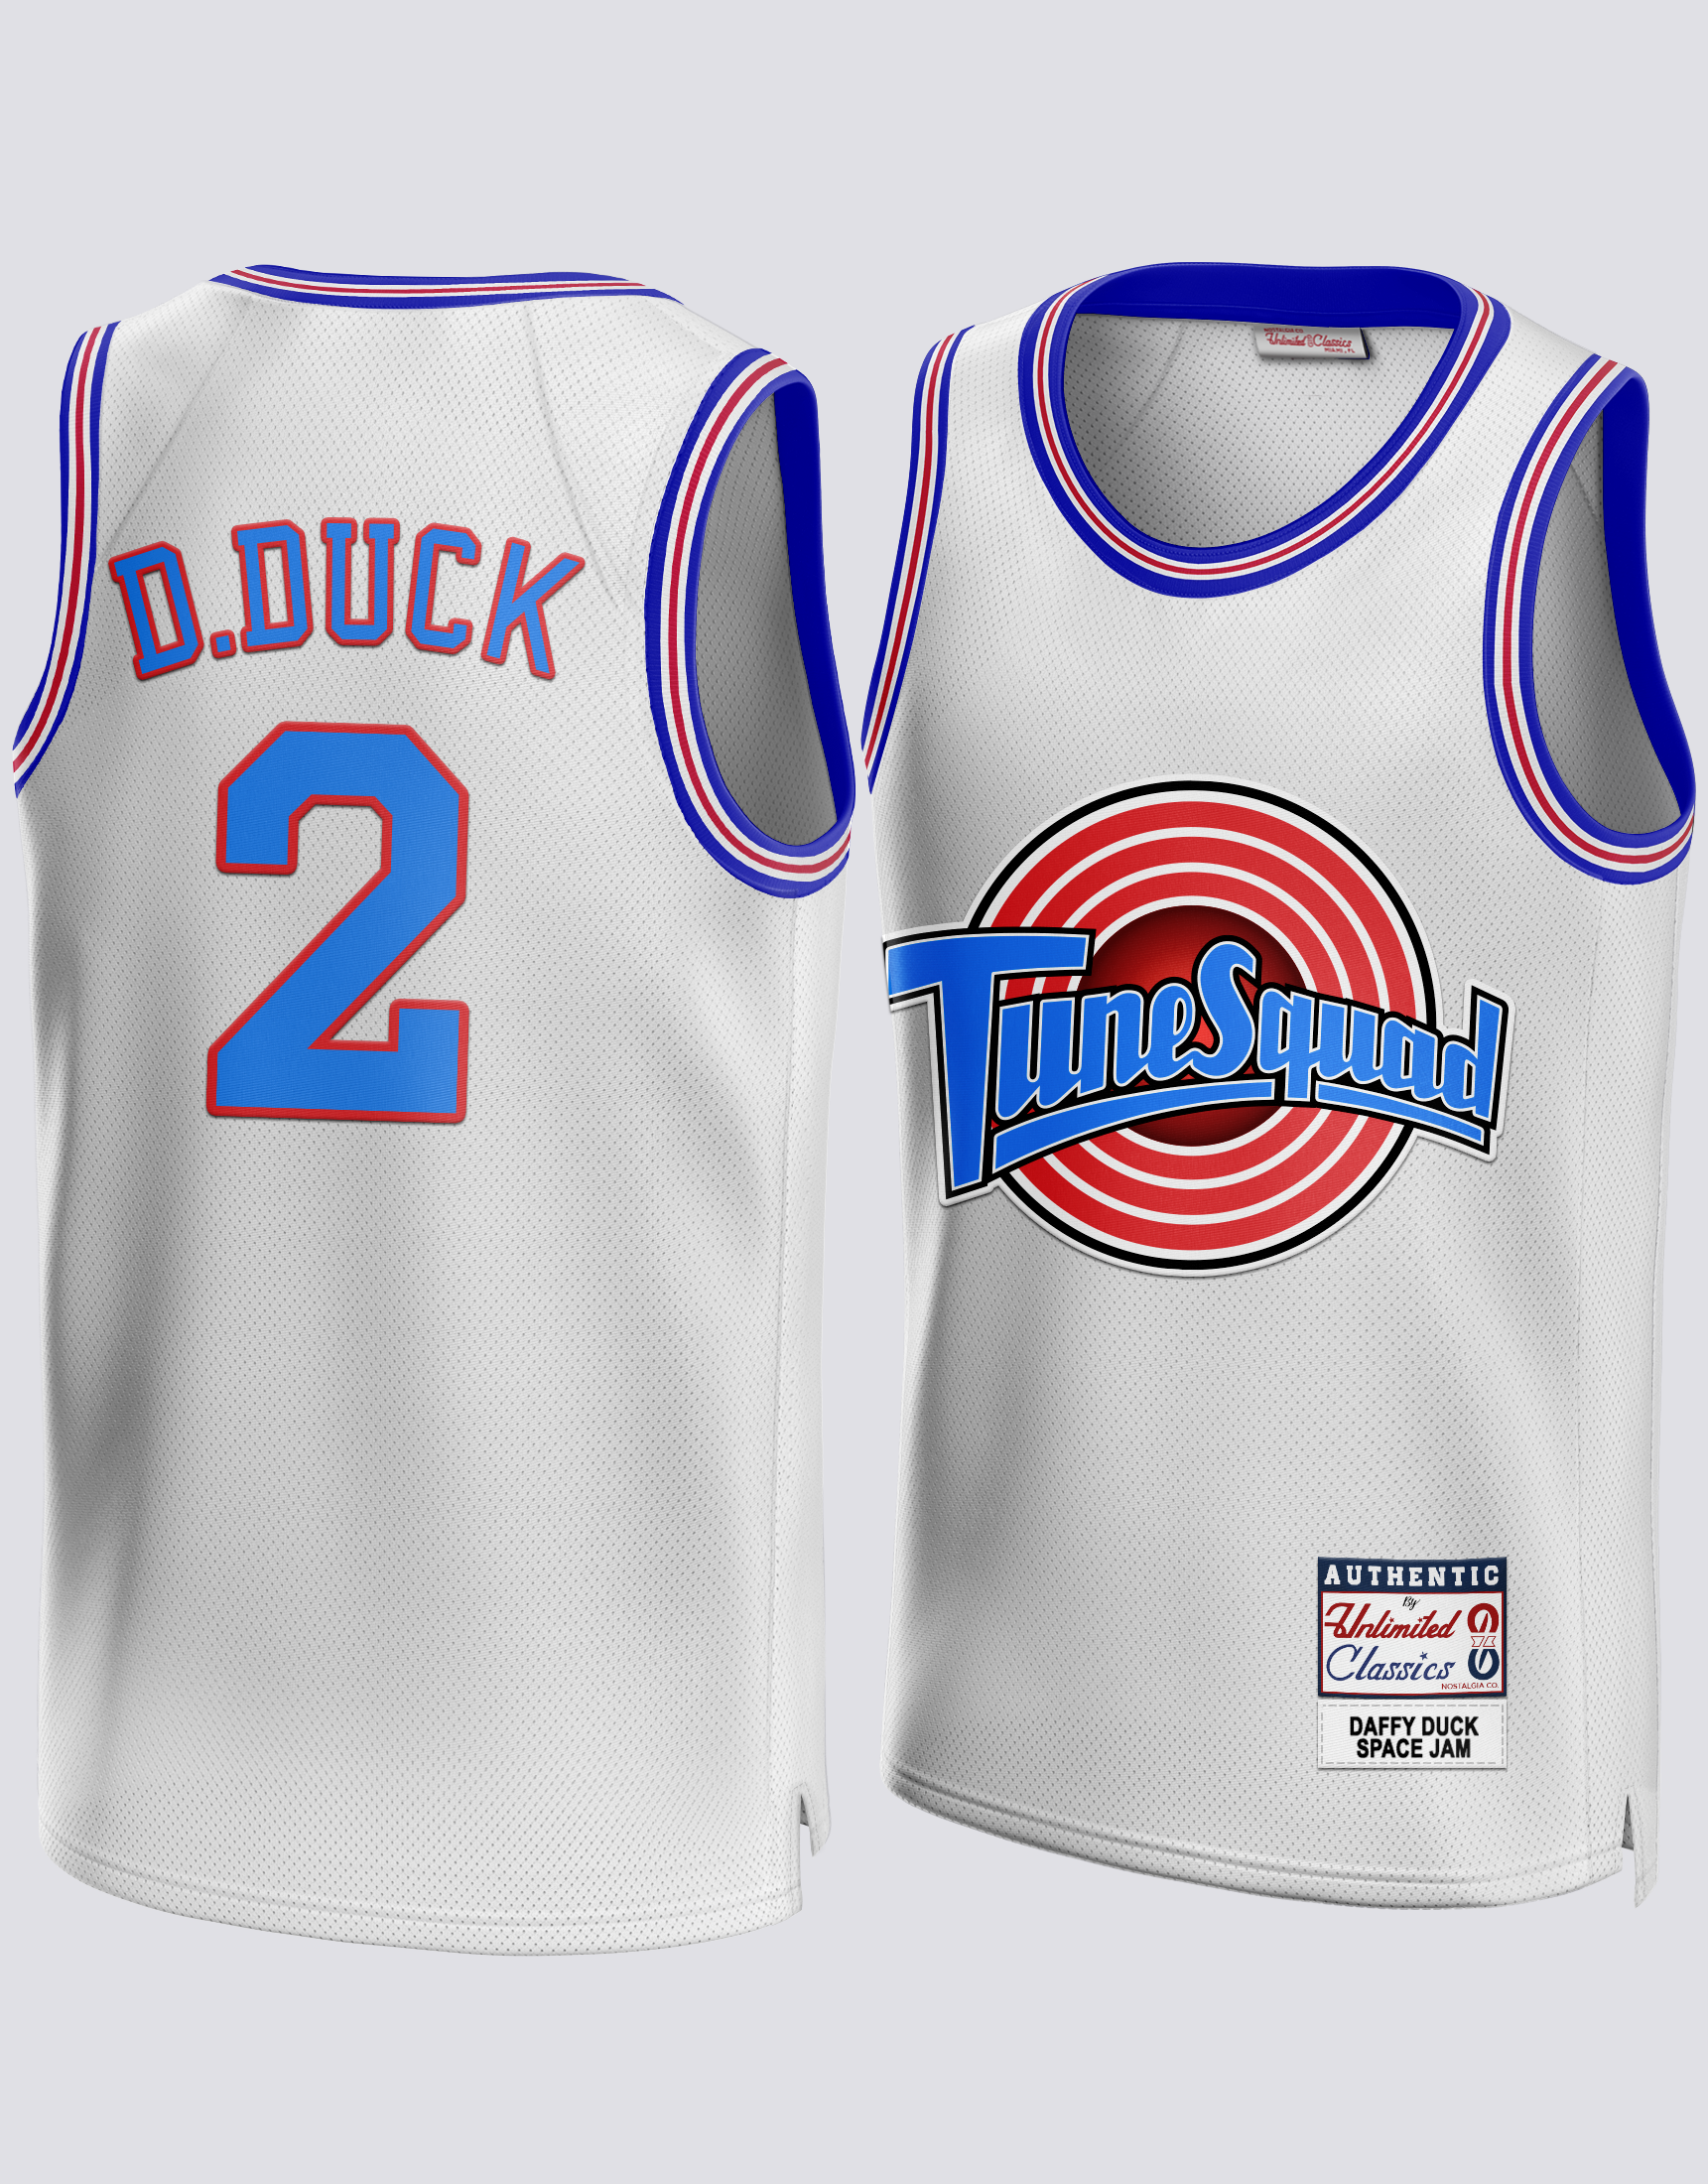 Daffy Duck #2 Space Jam Tune Squad White Basketball Jersey